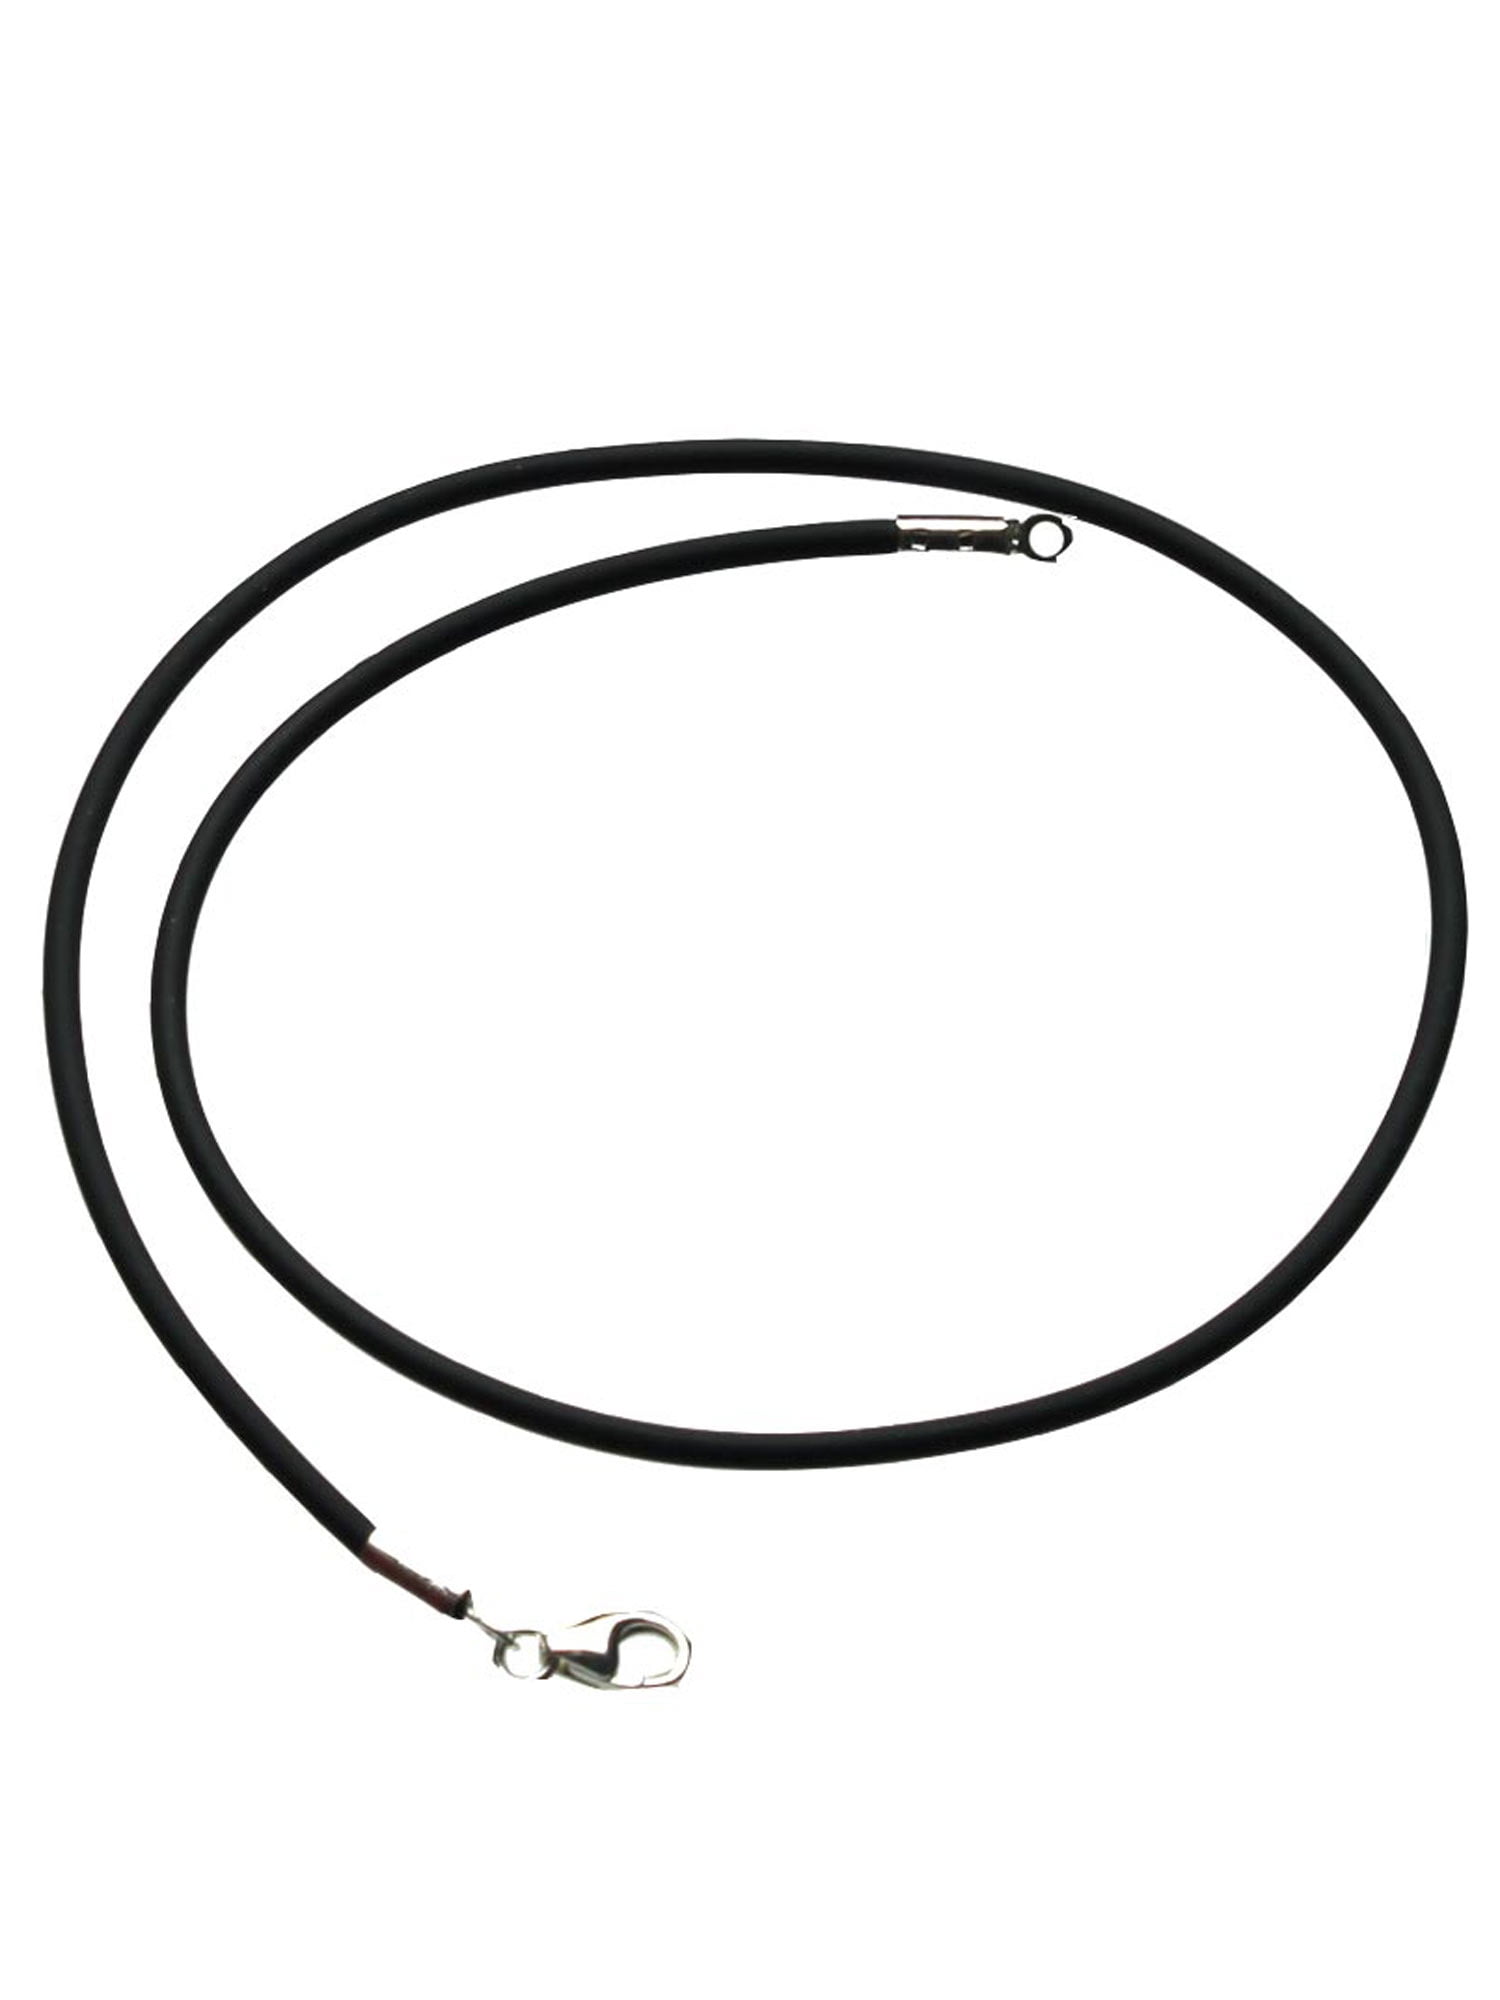 2mm Black Leather Cord Necklace with Sterling Silver Lobster Clasp 12-30